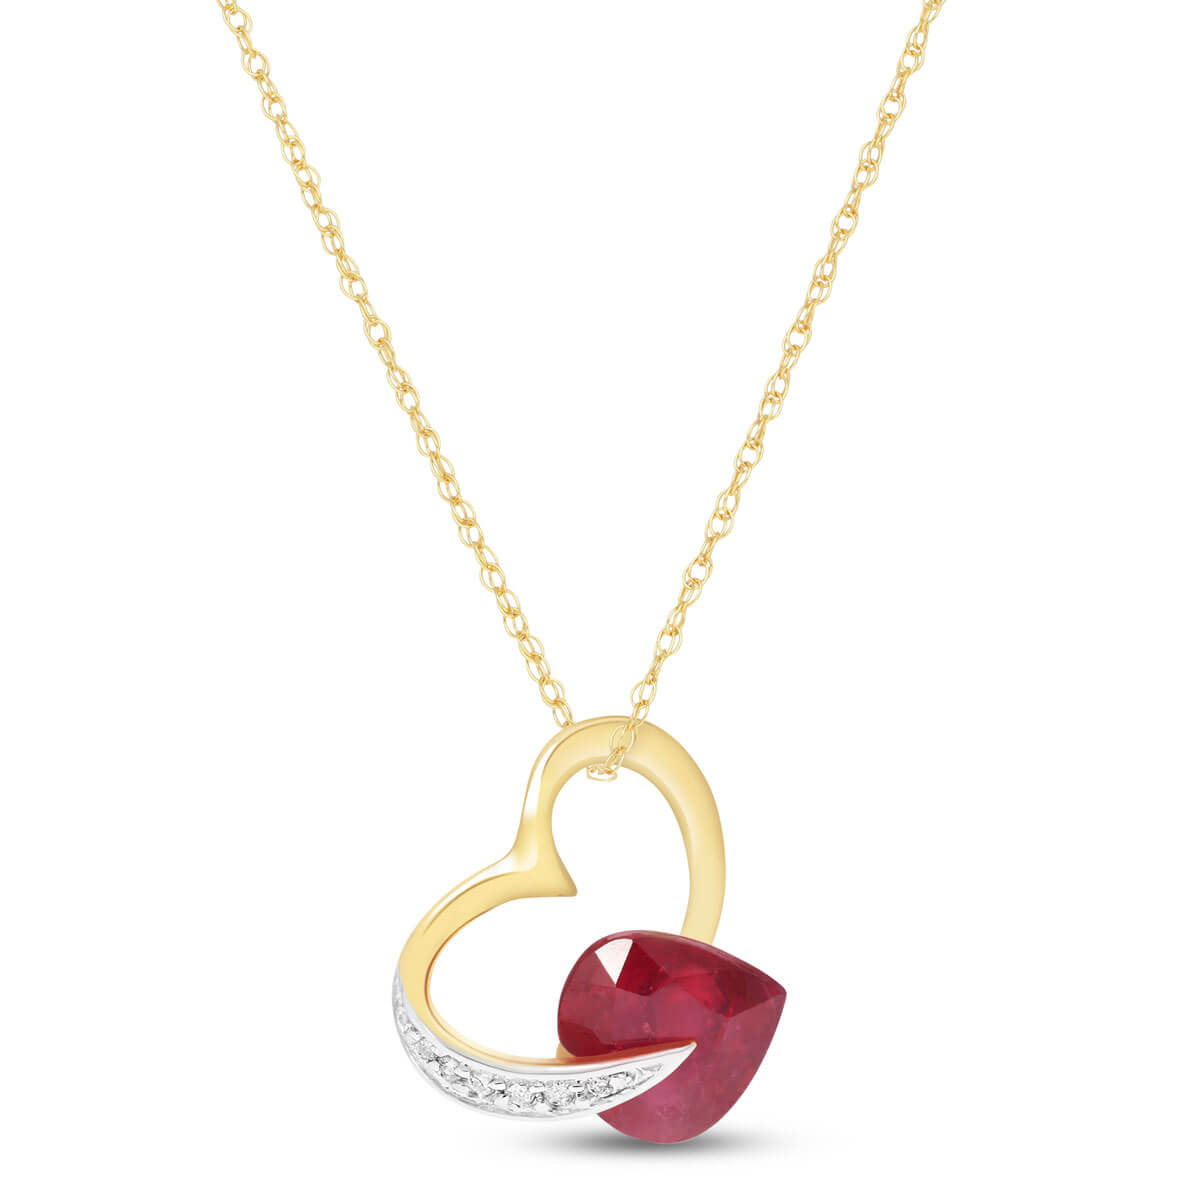 Ruby & Diamond Heart Pendant Necklace in 9ct Gold